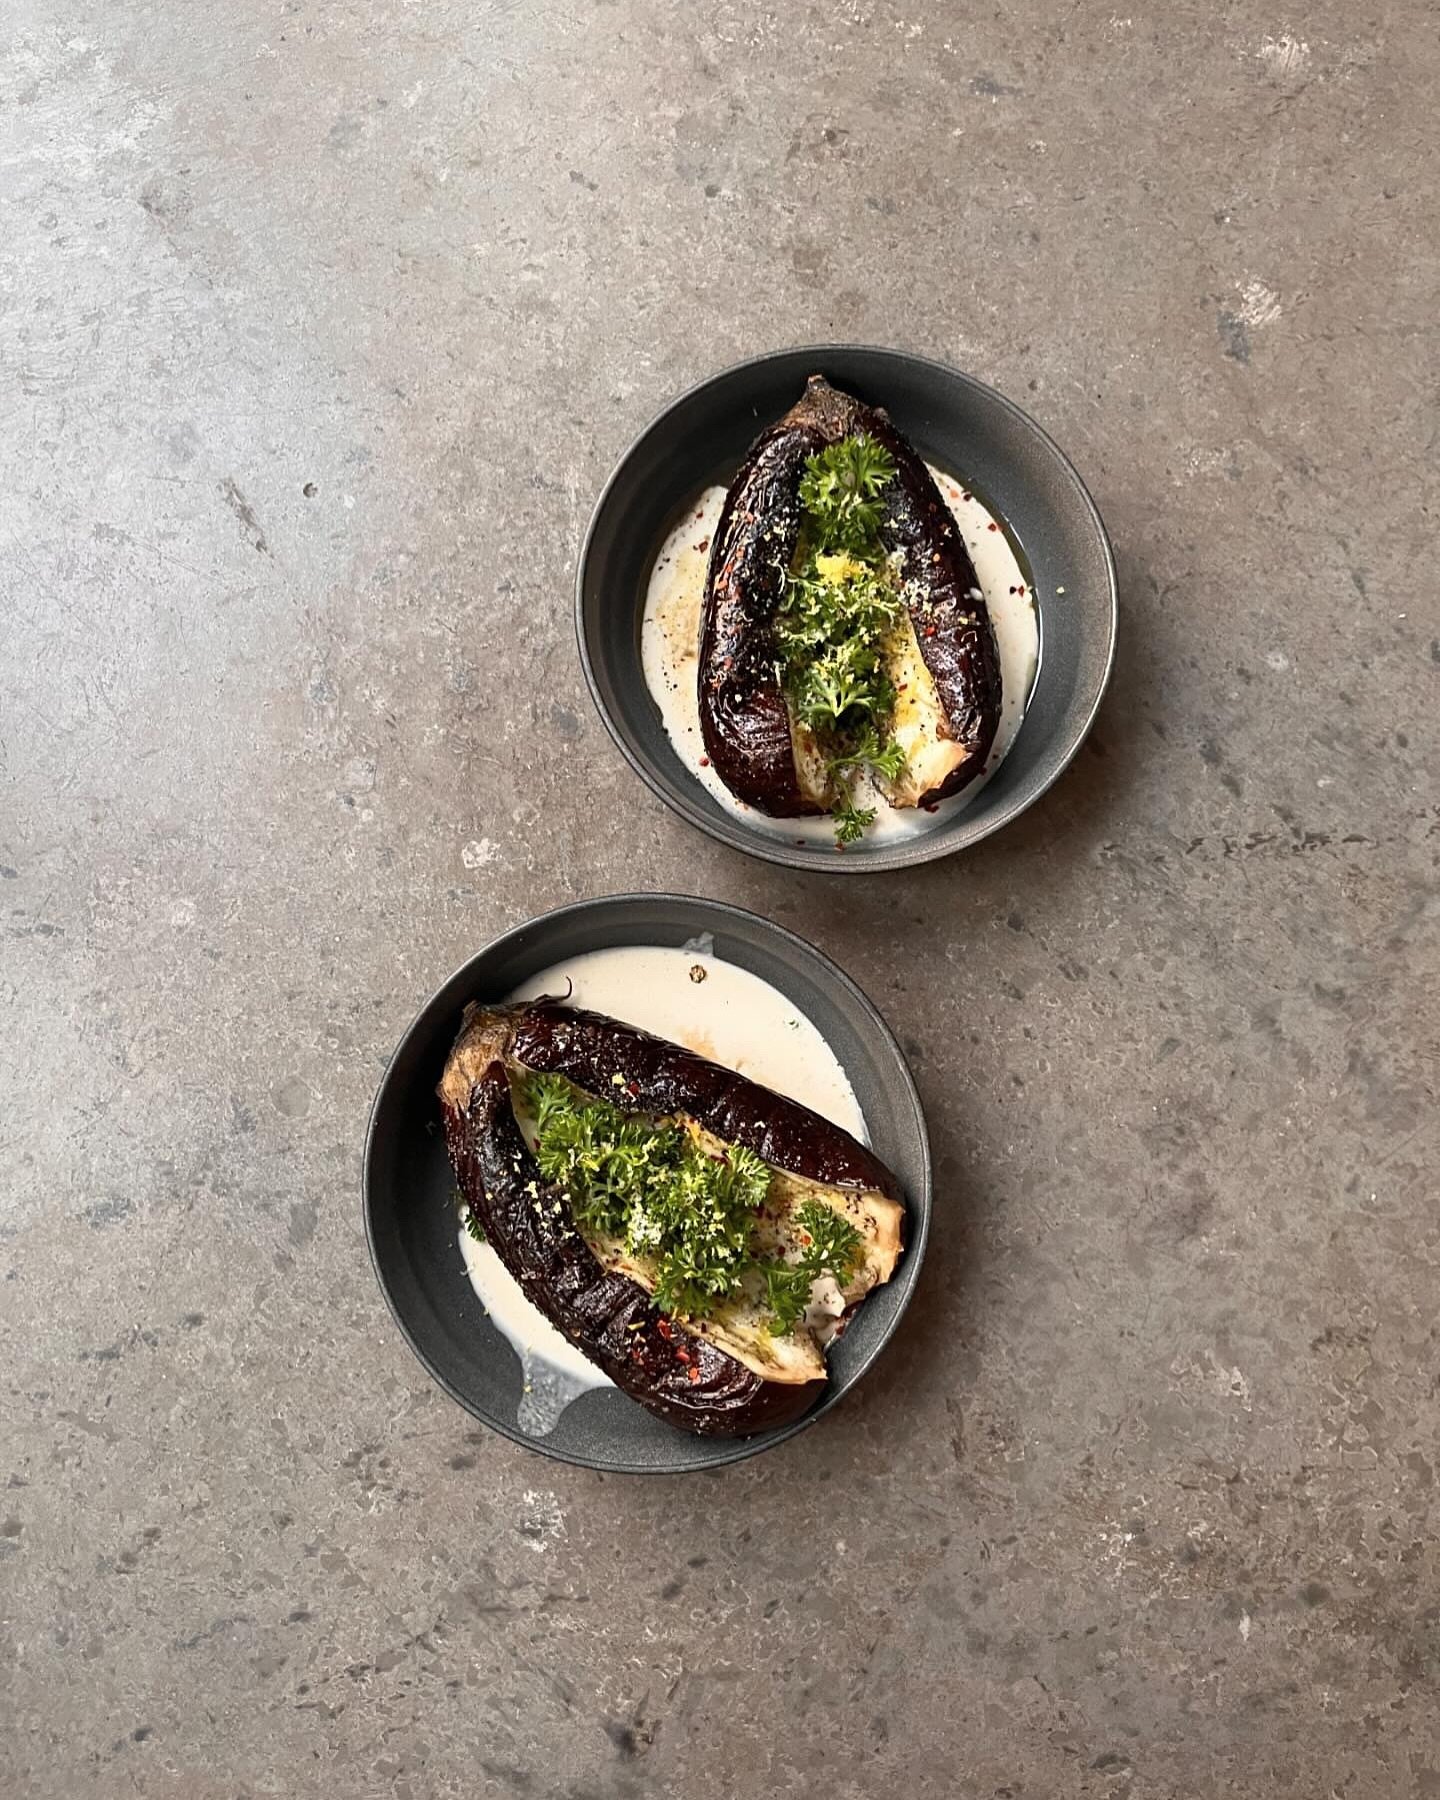 Charred eggplant dip with tahini &amp; sourdough made by our friend @brynaea using our 2023 Saca Sabella Farms olive oil 🫒🕊️